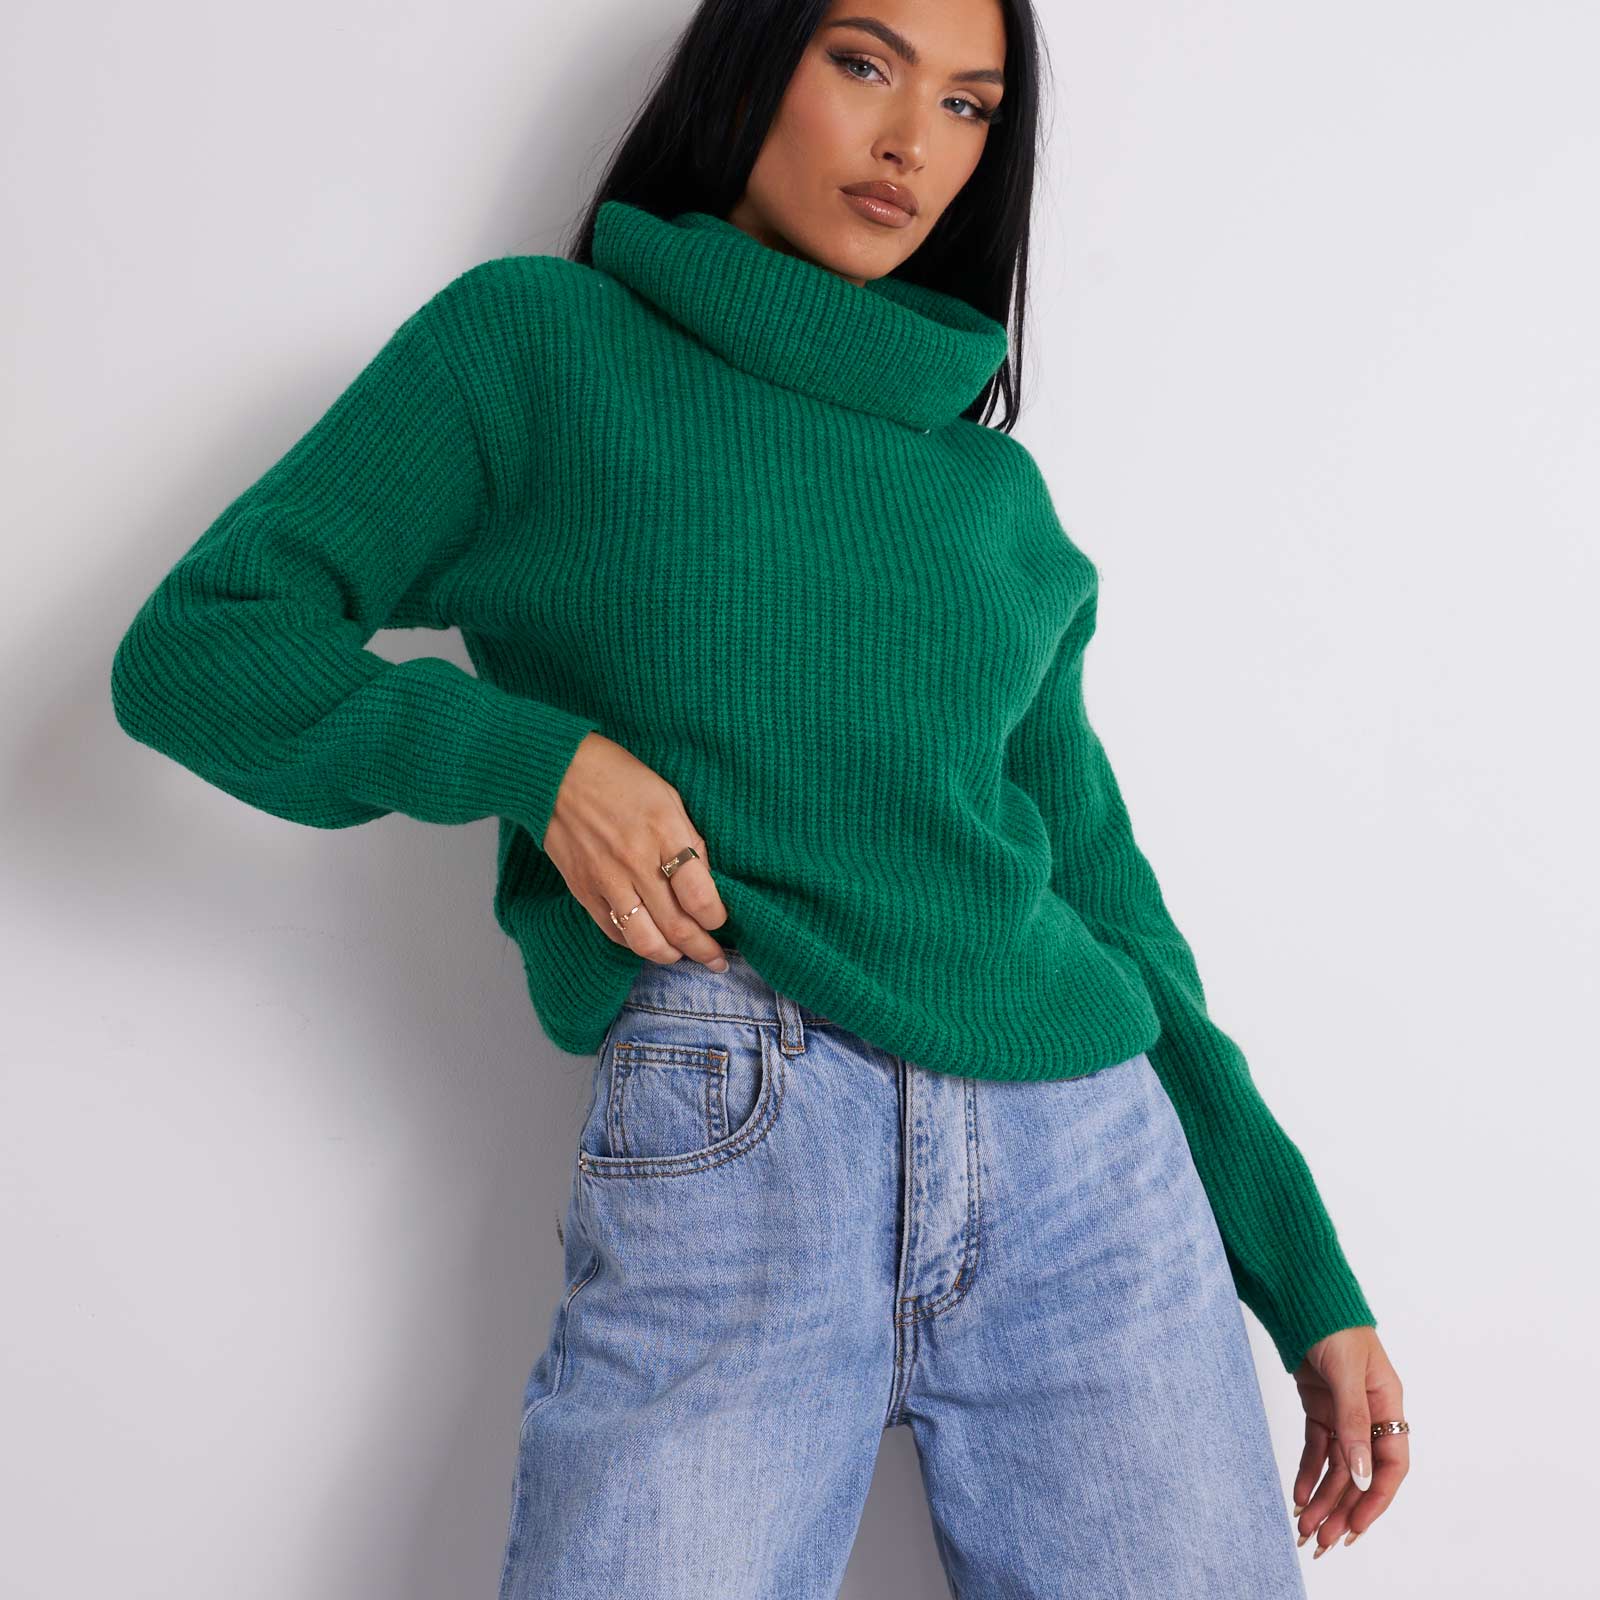 Knitted Roll Neck Jumper In Green UK Medium/Large M/L, Green